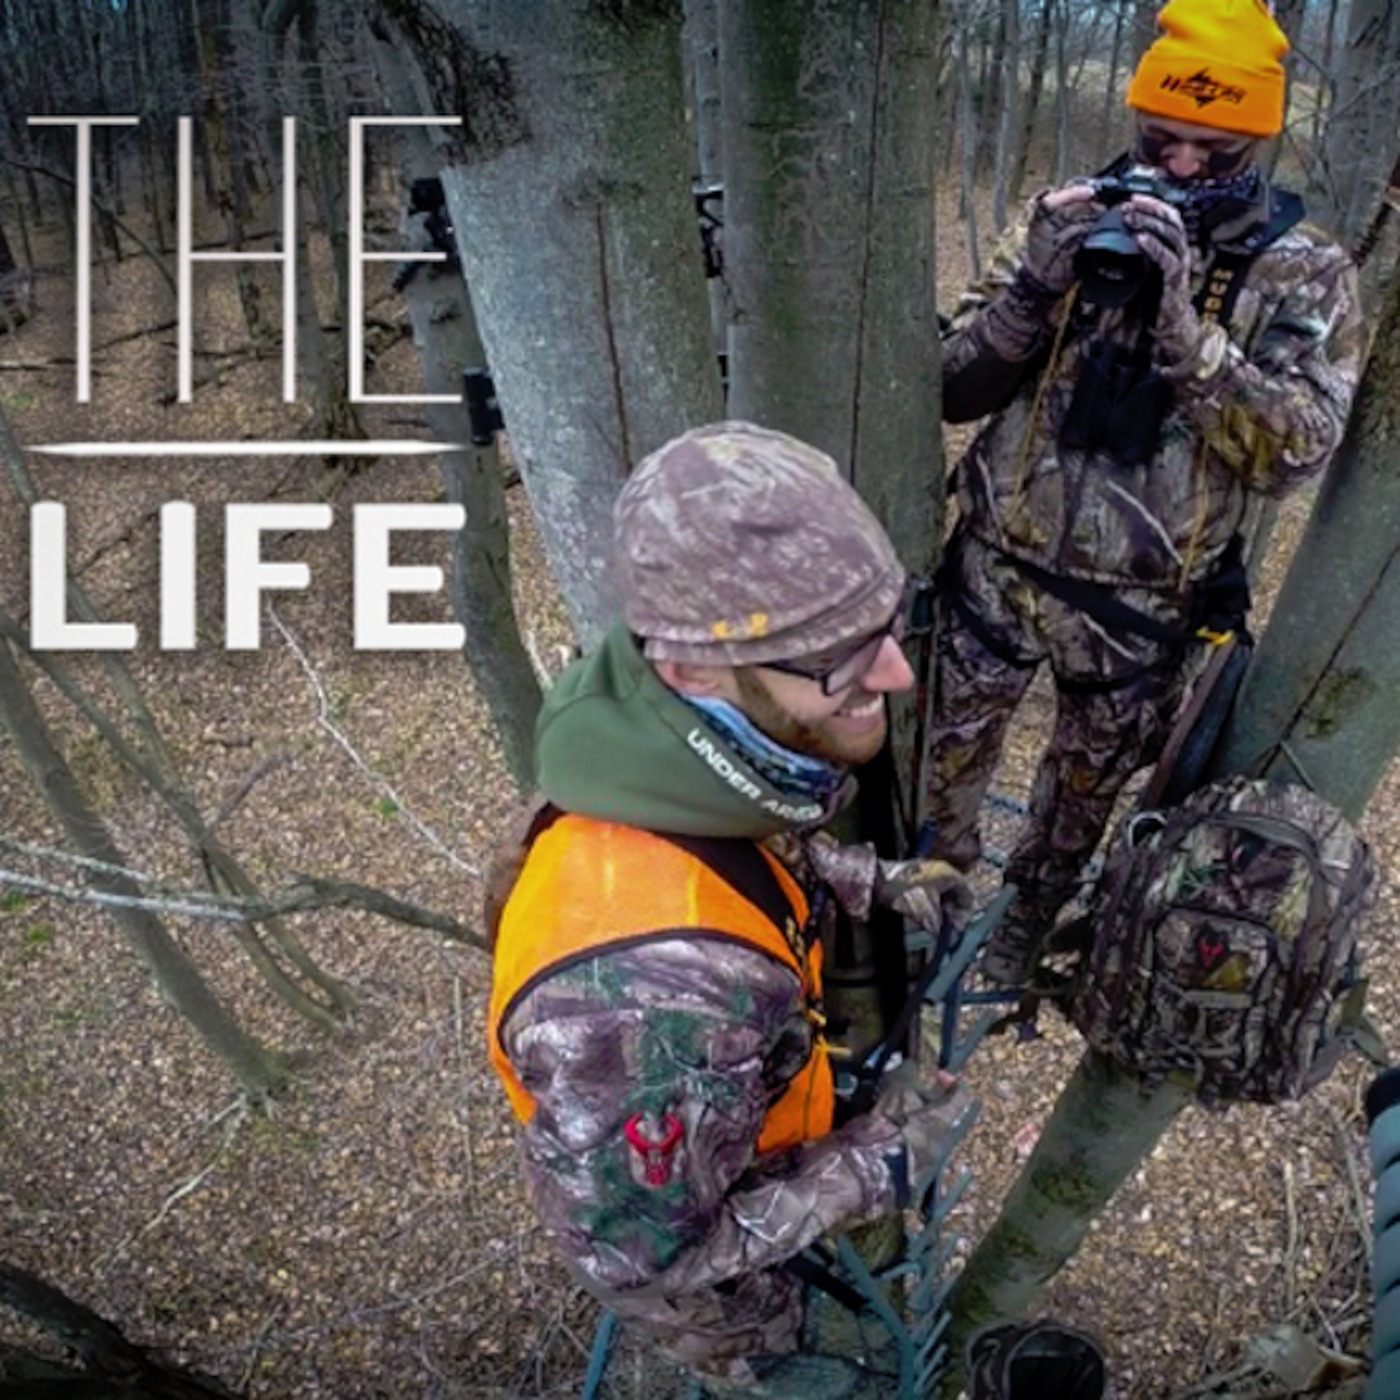 PA Rut Report: Episode 20.5 - The LIFE (Sportsman Channel dudes) and the one drink minimum...